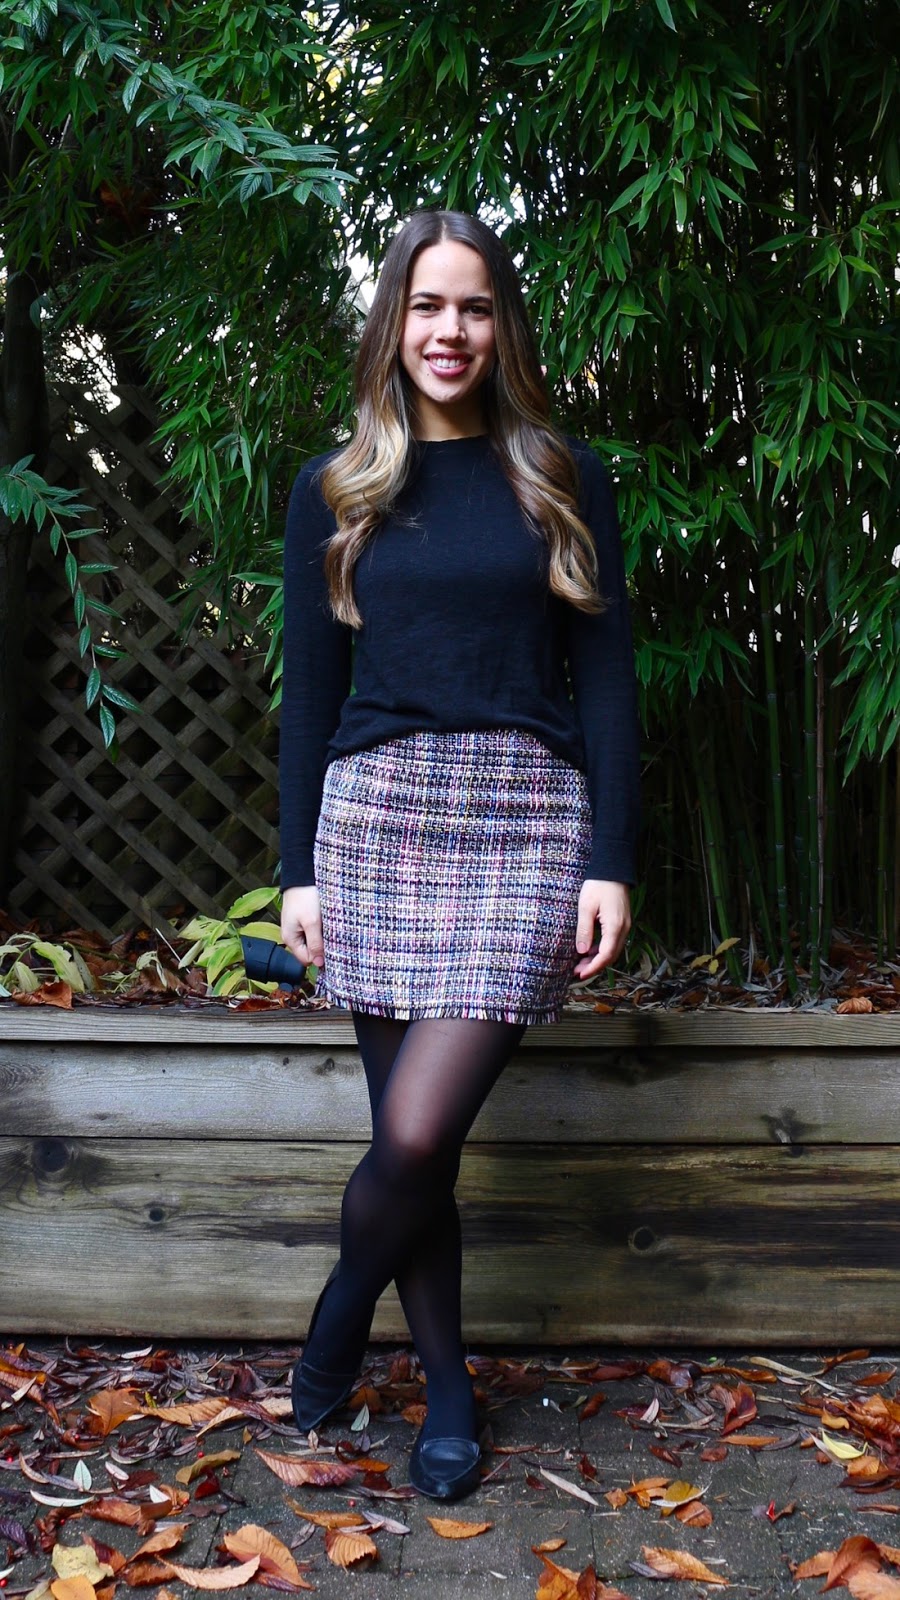 Jules in Flats - H&M Tweed Skirt + Black Sweater (Business Casual Fall Workwear on a Budget) 